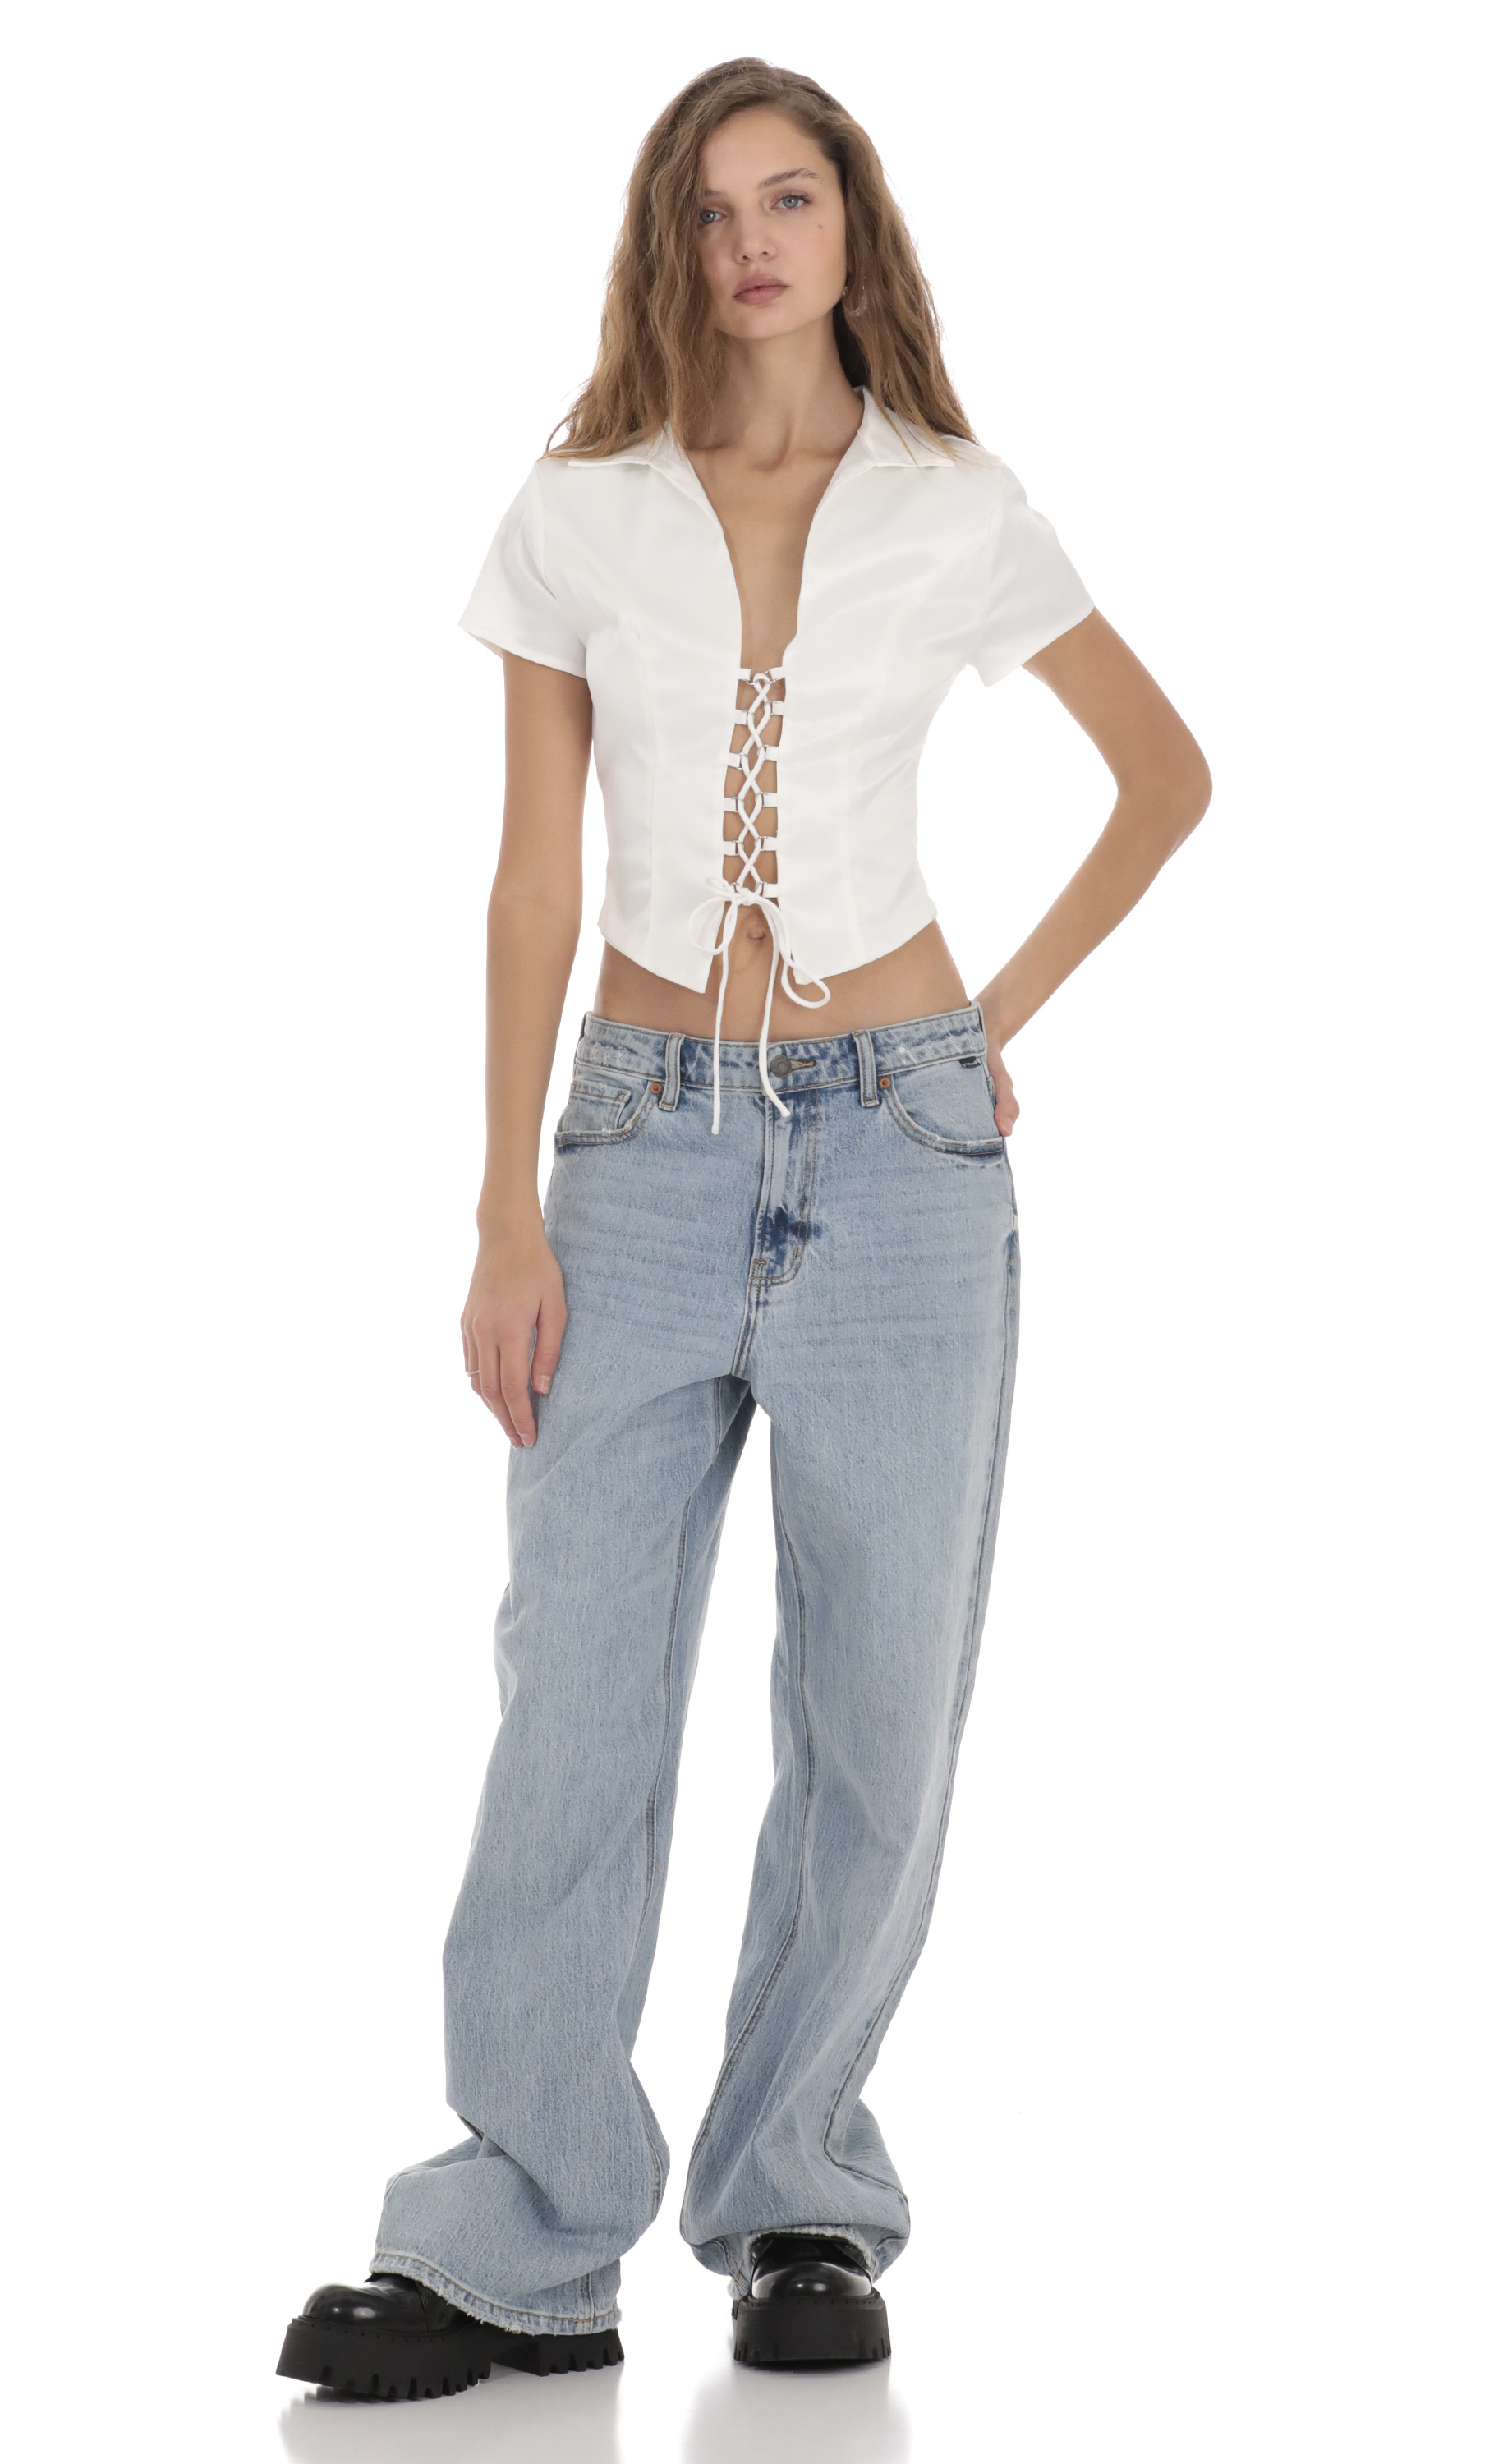 Collared Lace-Up Top in White